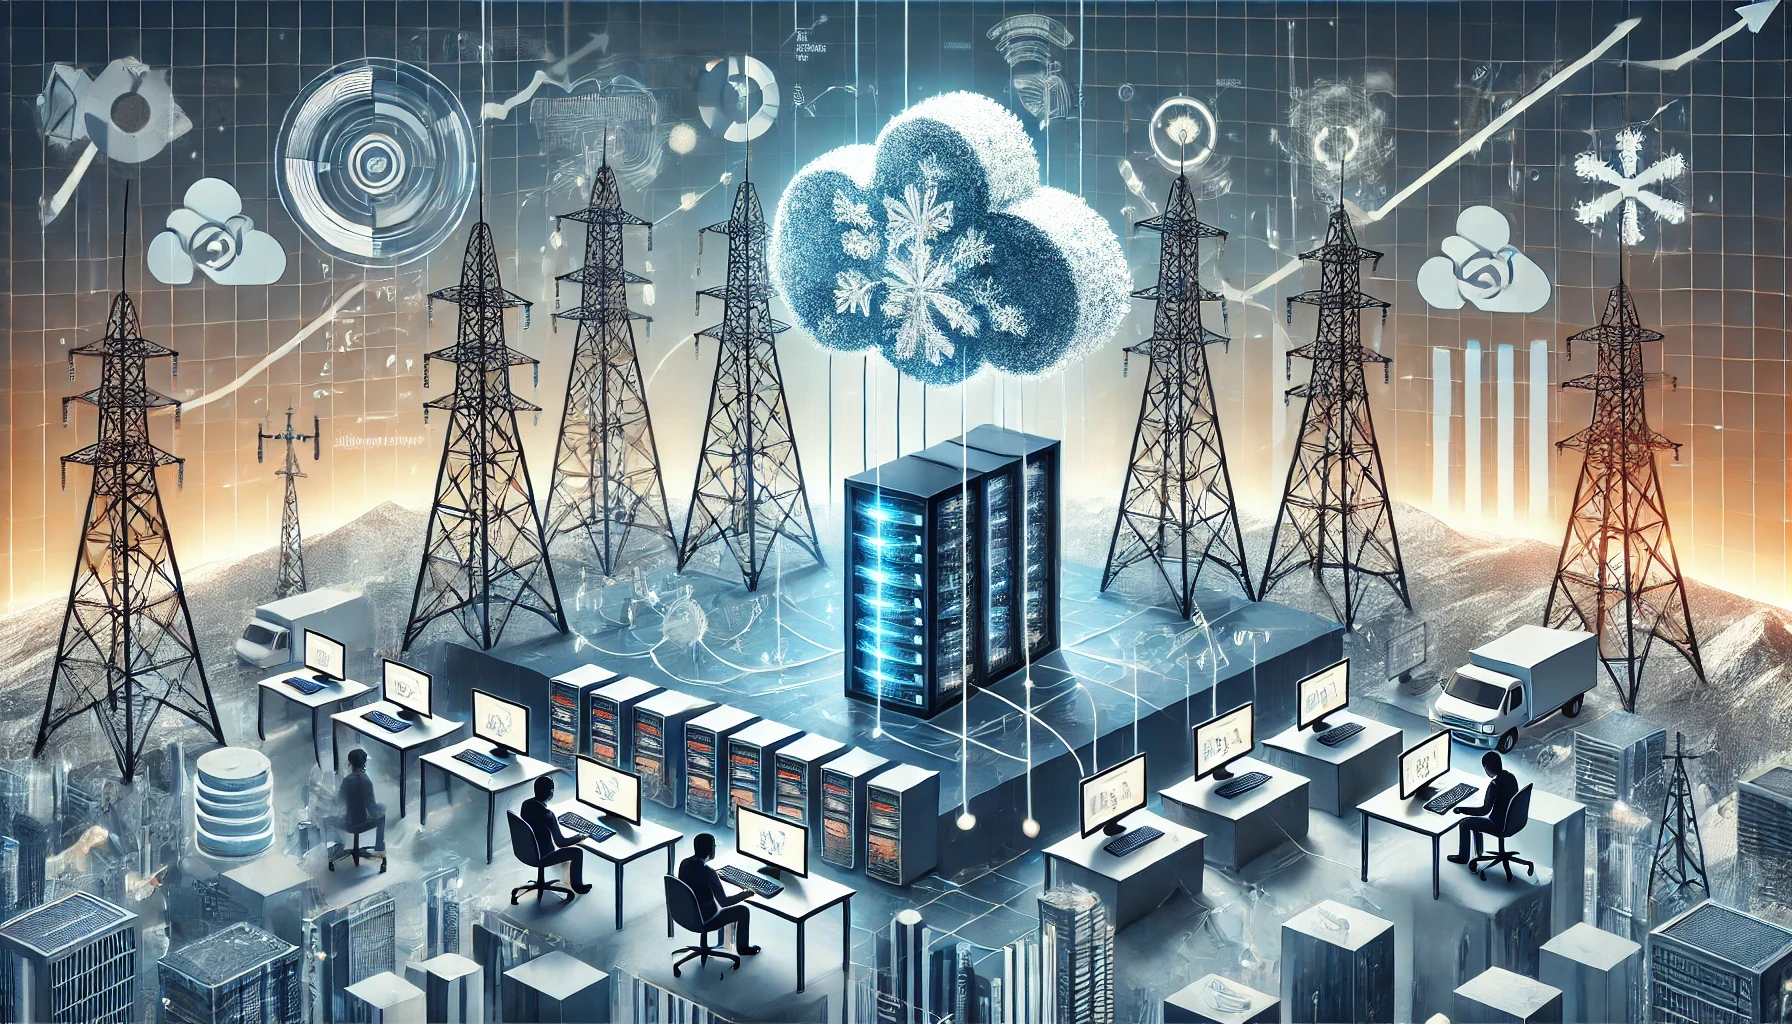 Illustration of telecom companies transitioning from Databricks to Snowflake, featuring telecom towers, data lines, and professionals working on computers, emphasizing cost efficiency.